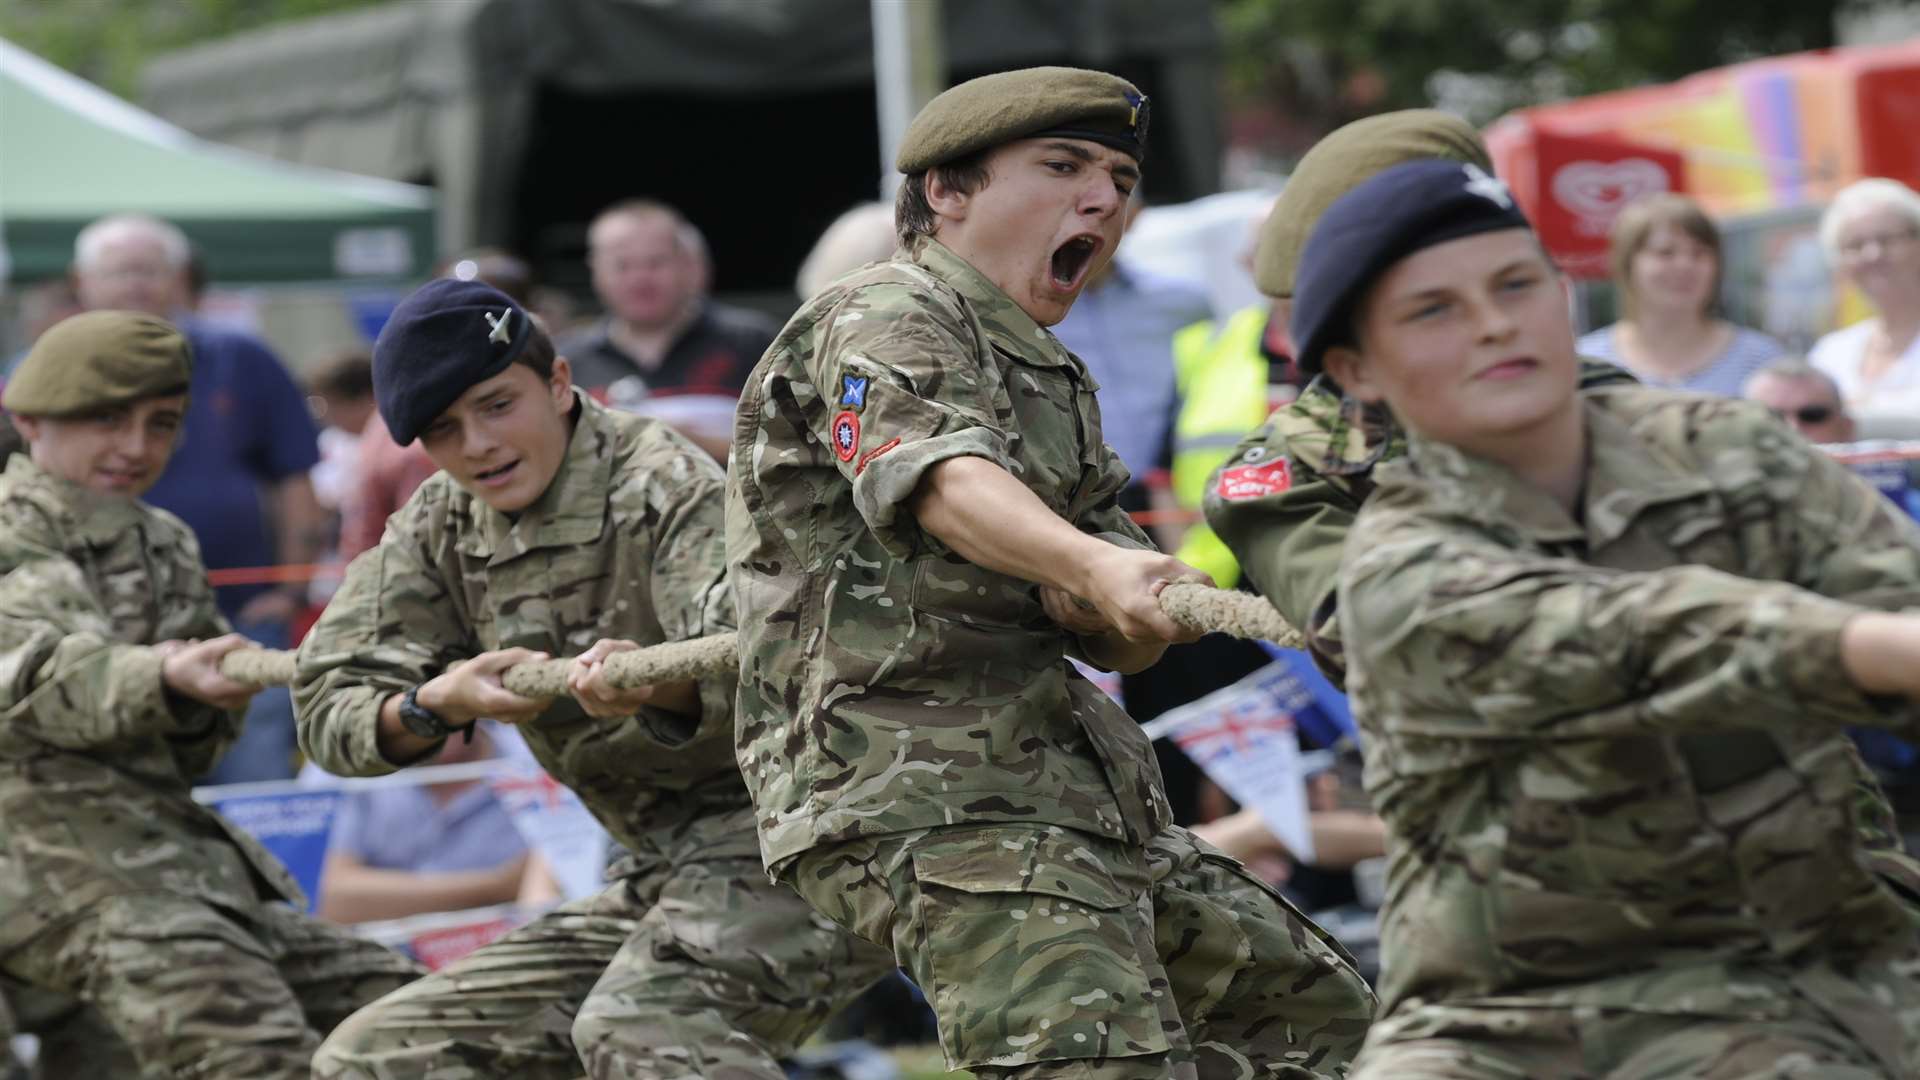 Cadets being put through their paces at last year's Armed Forces Day. They will be back this year.